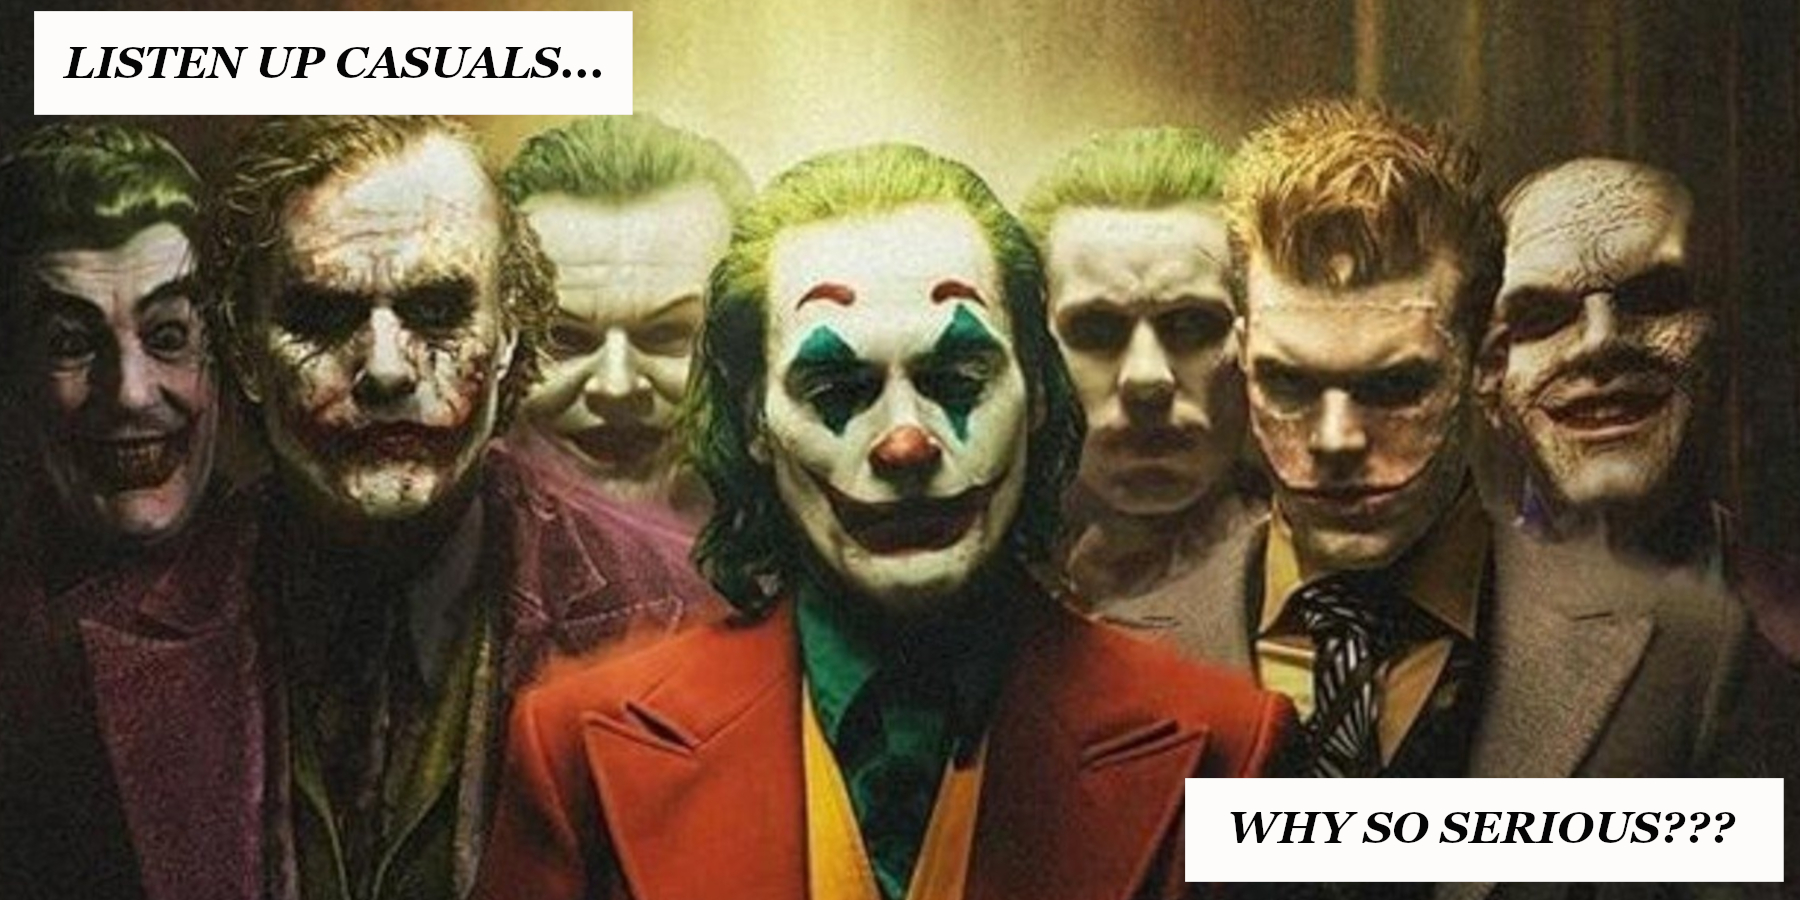 004 - Why So Serious